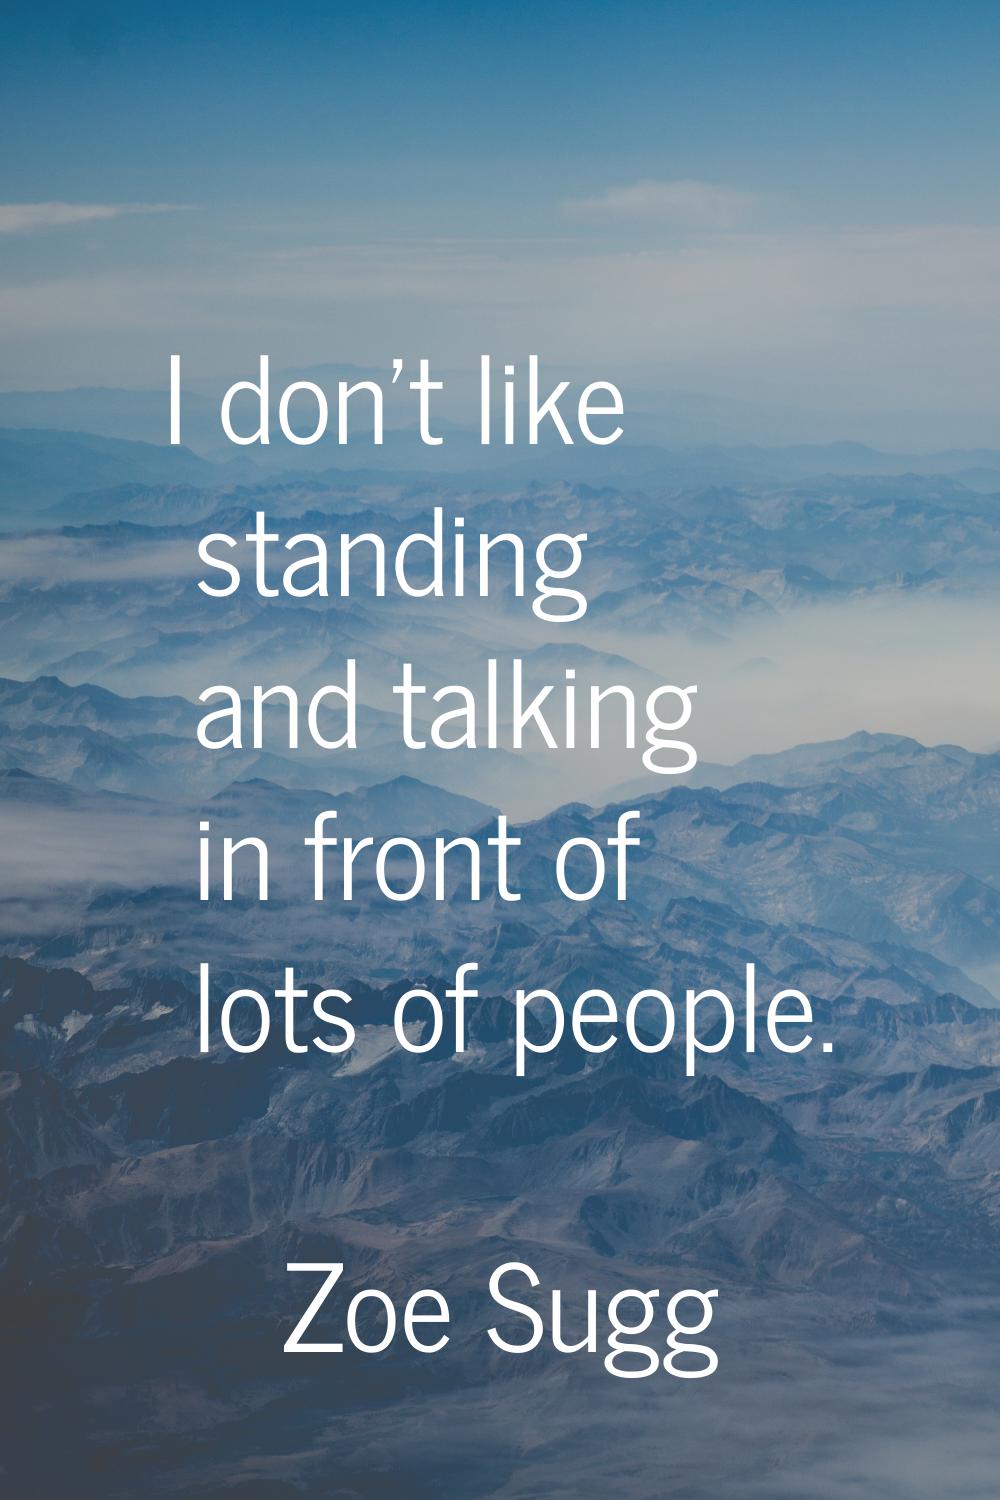 I don't like standing and talking in front of lots of people.